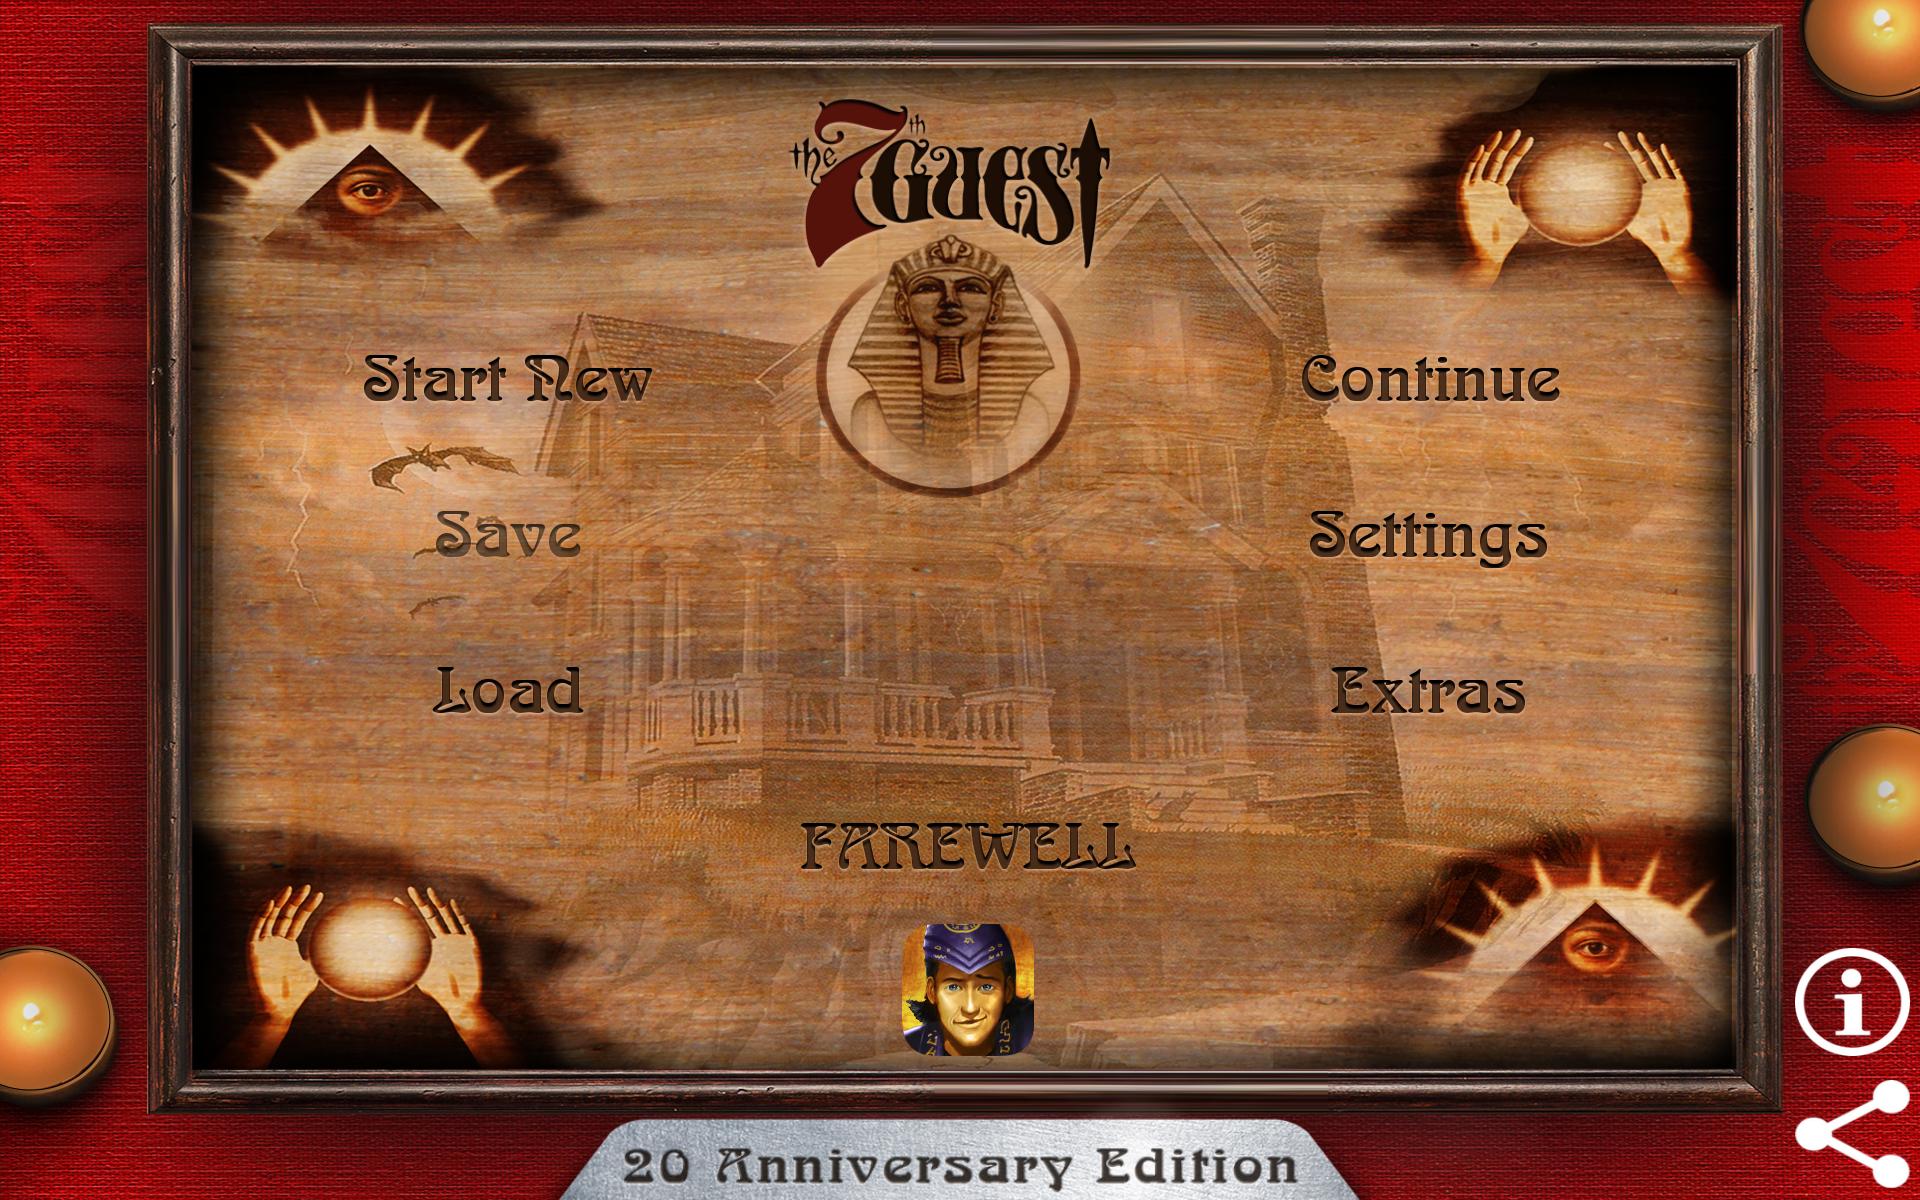 7 гость игра. 7 Guest игра. The 7th Guest: Remastered. The 7th Guest: 25th Anniversary Edition. 7th Guest игра.